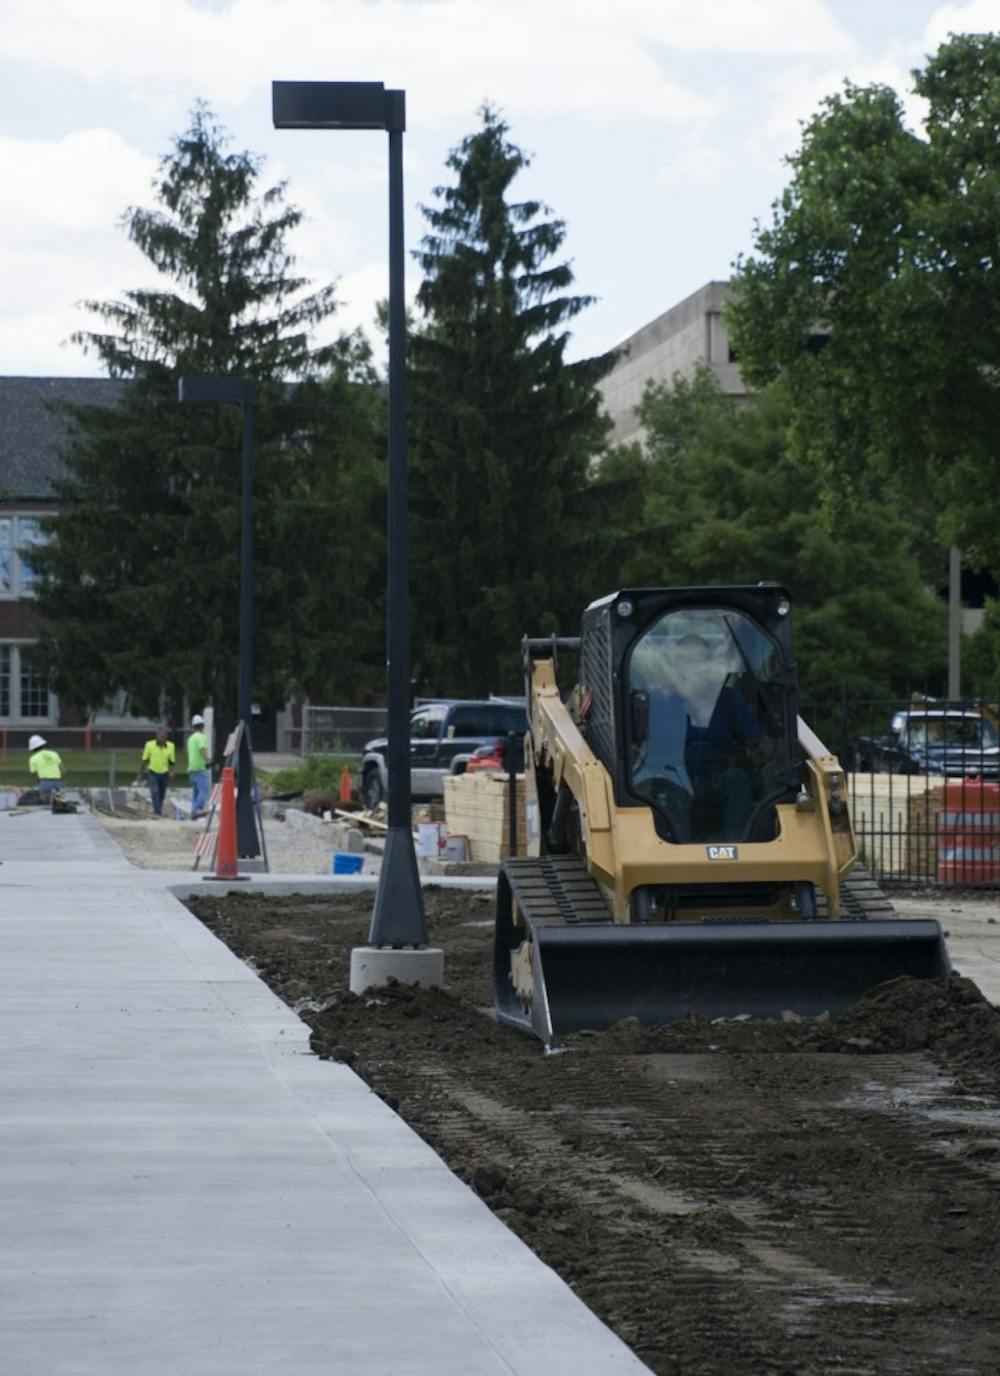 <p>Ball State worked on improving its energy efficiency this past summer, including installing distribution piping for buildings on campus. The main focuses were on University Ave. across from Burrus and Lucina, and on the east side of DeHority Hall.&nbsp;<em>Samantha Brammer // DN File</em></p>